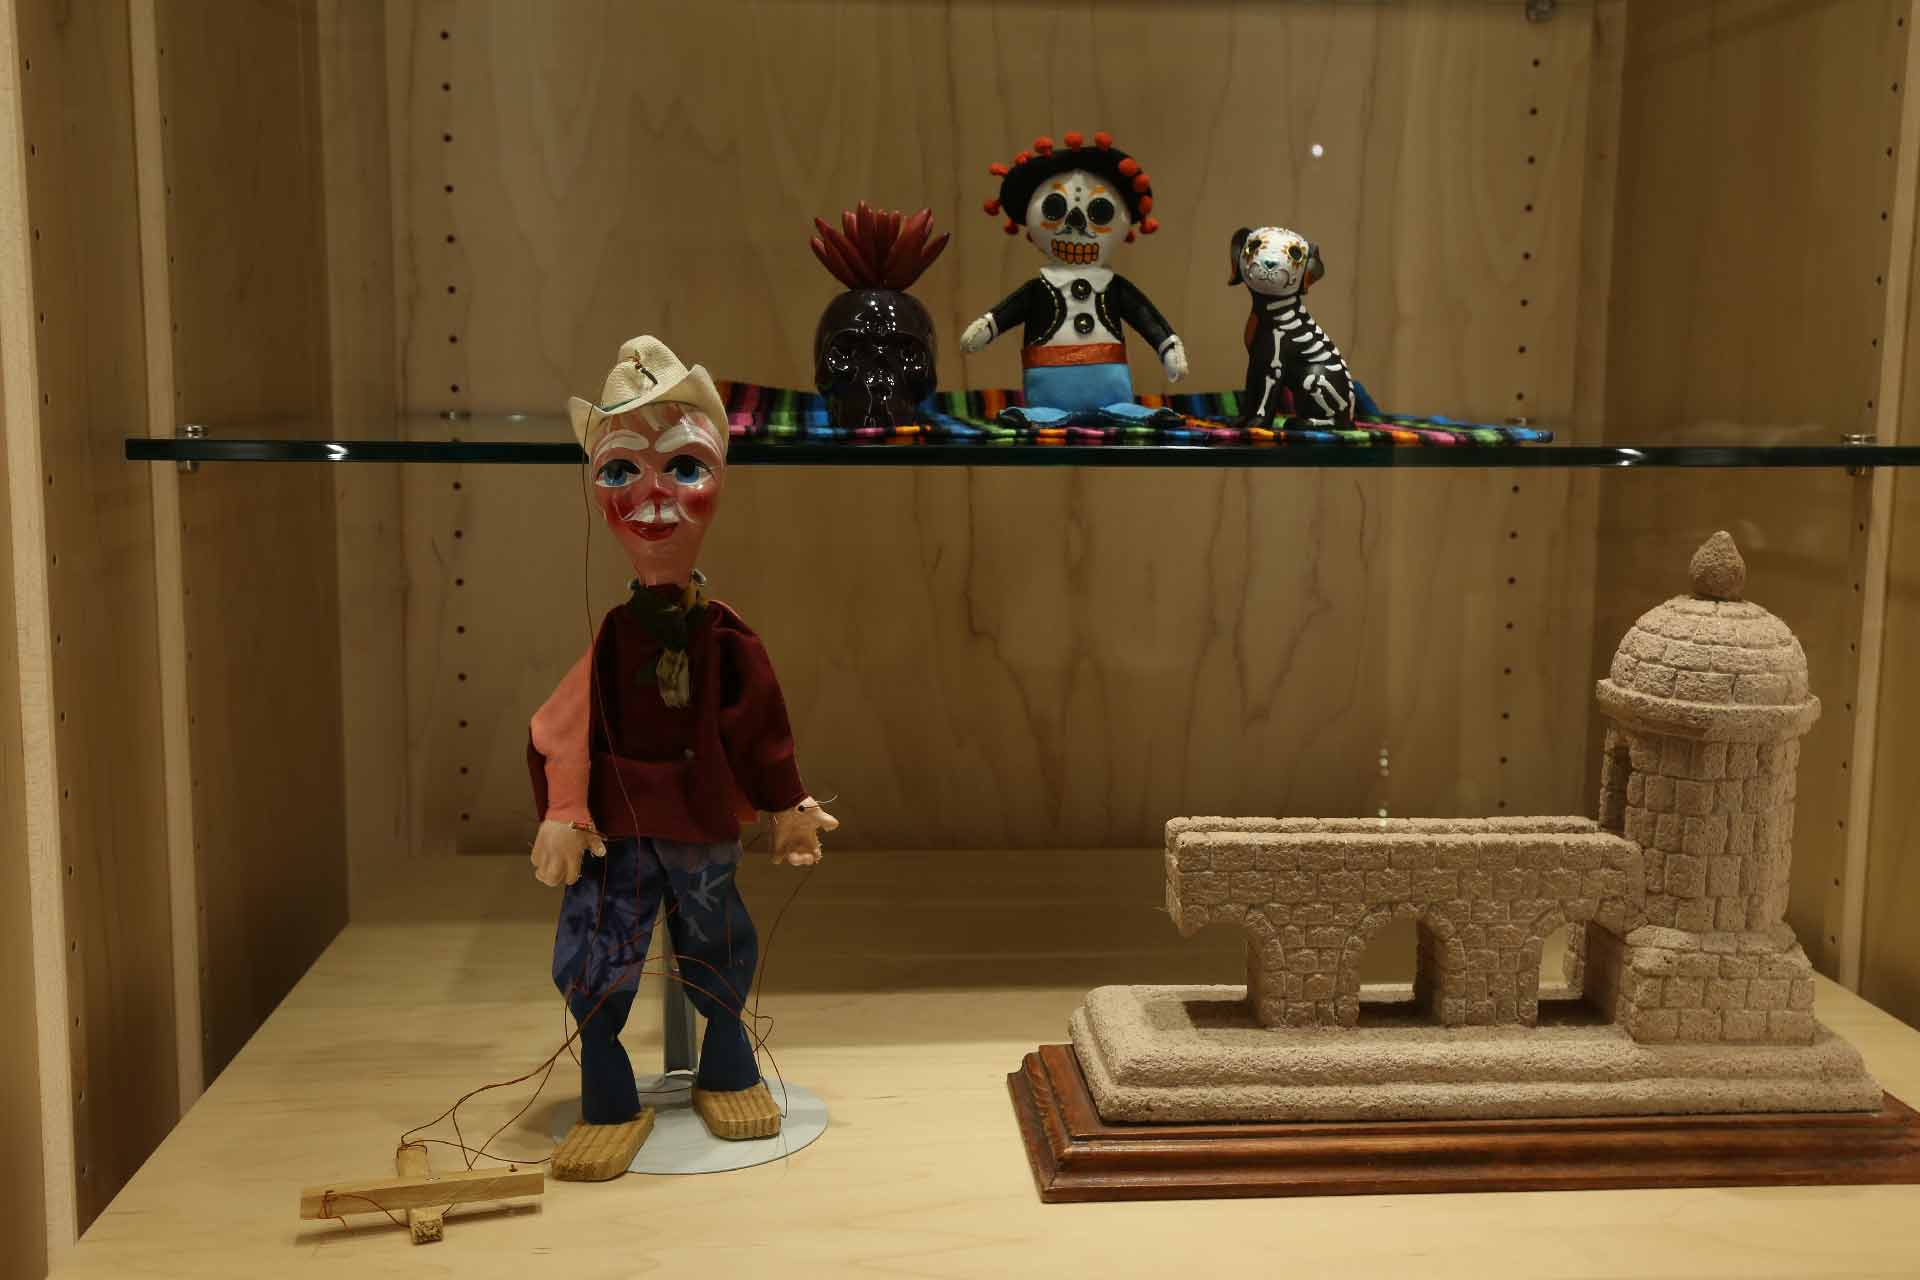 the skull, figure and dog sitting on the color mat sit on a platform while a puppet doll and a small piece of a building sculpture are underneath